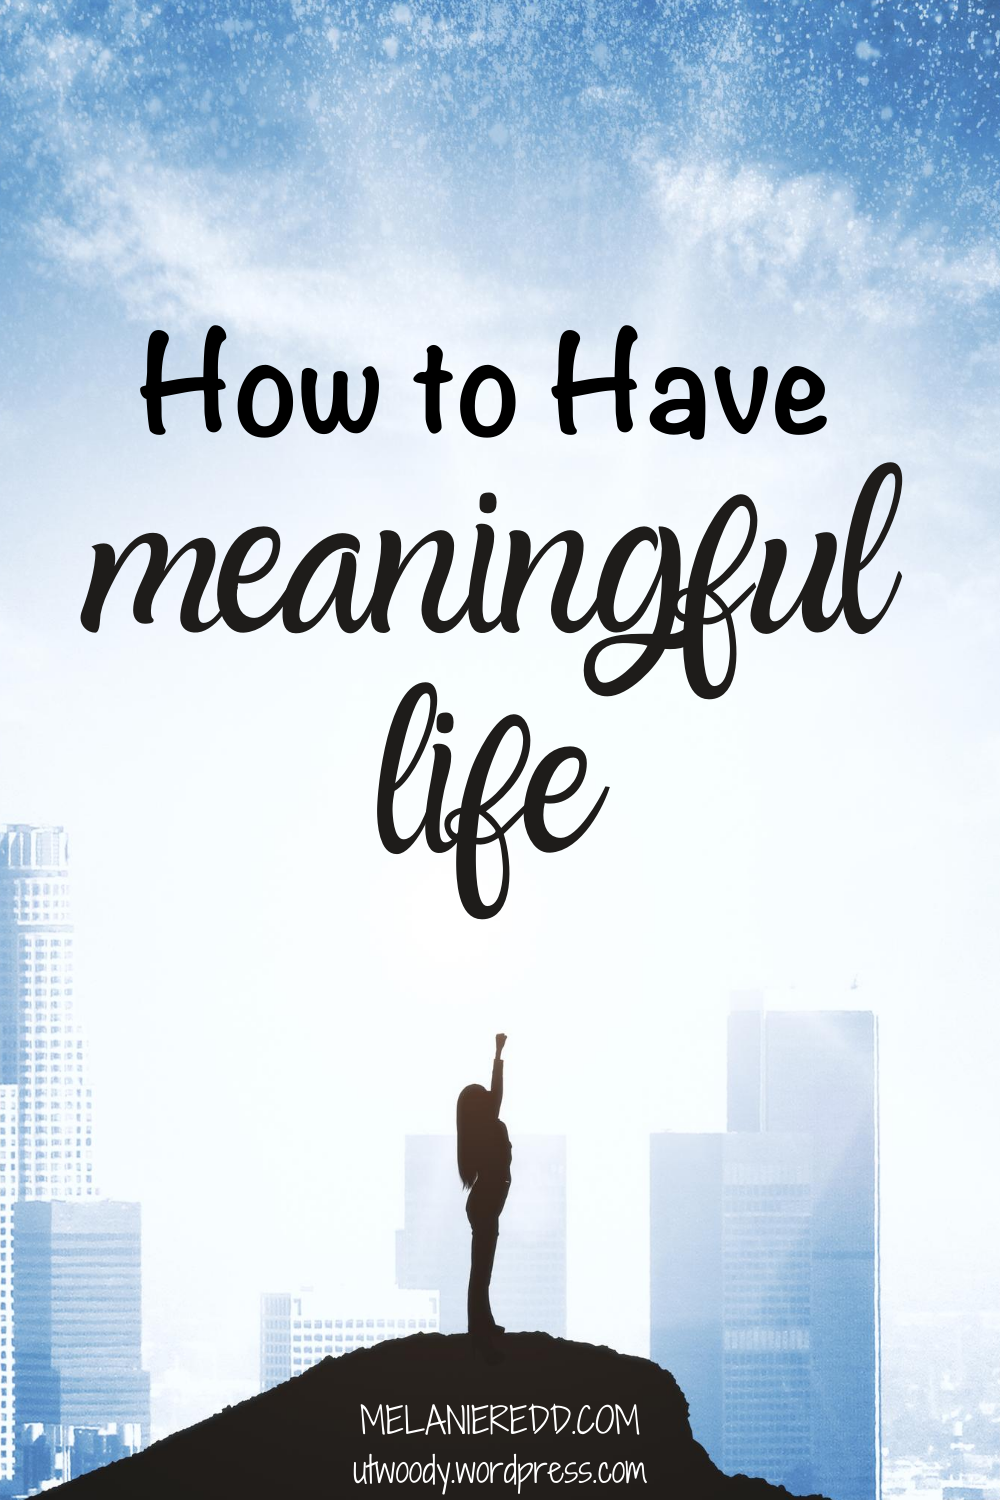 People are wondering about the future. Others are looking for purpose and calling. As you are on your search, why not drop by for a visit? Discover how to have meaningful life. #life #meaninginlife #meaningfullife #hope